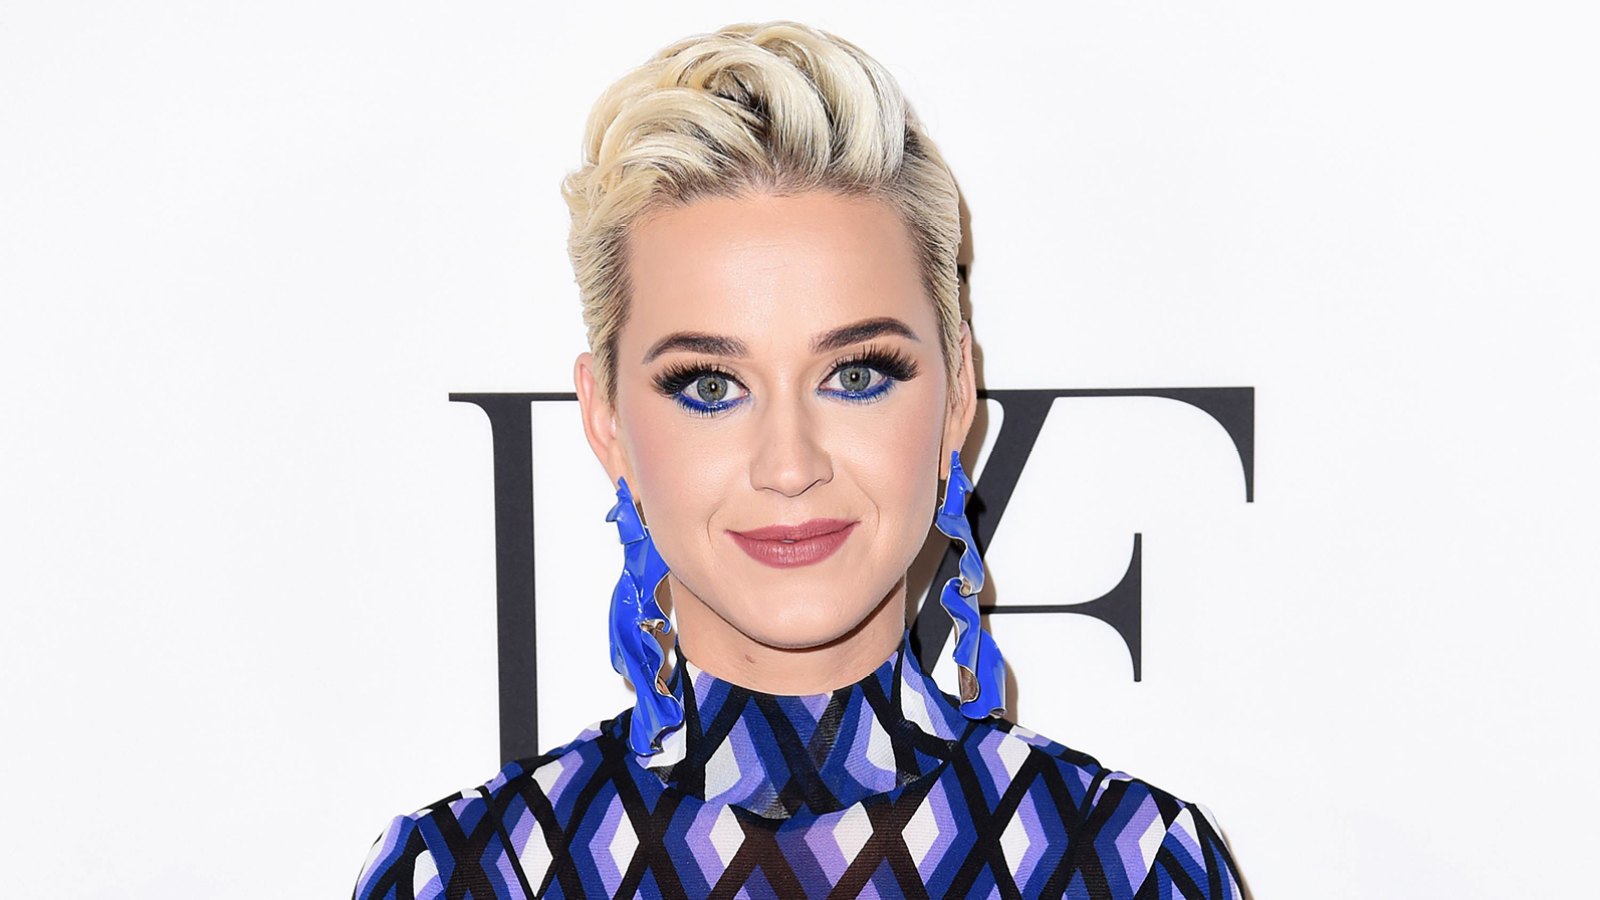 Katy Perry Says New Song ‘Smile’ Was Written During the ‘Darkest’ Period of Her Life